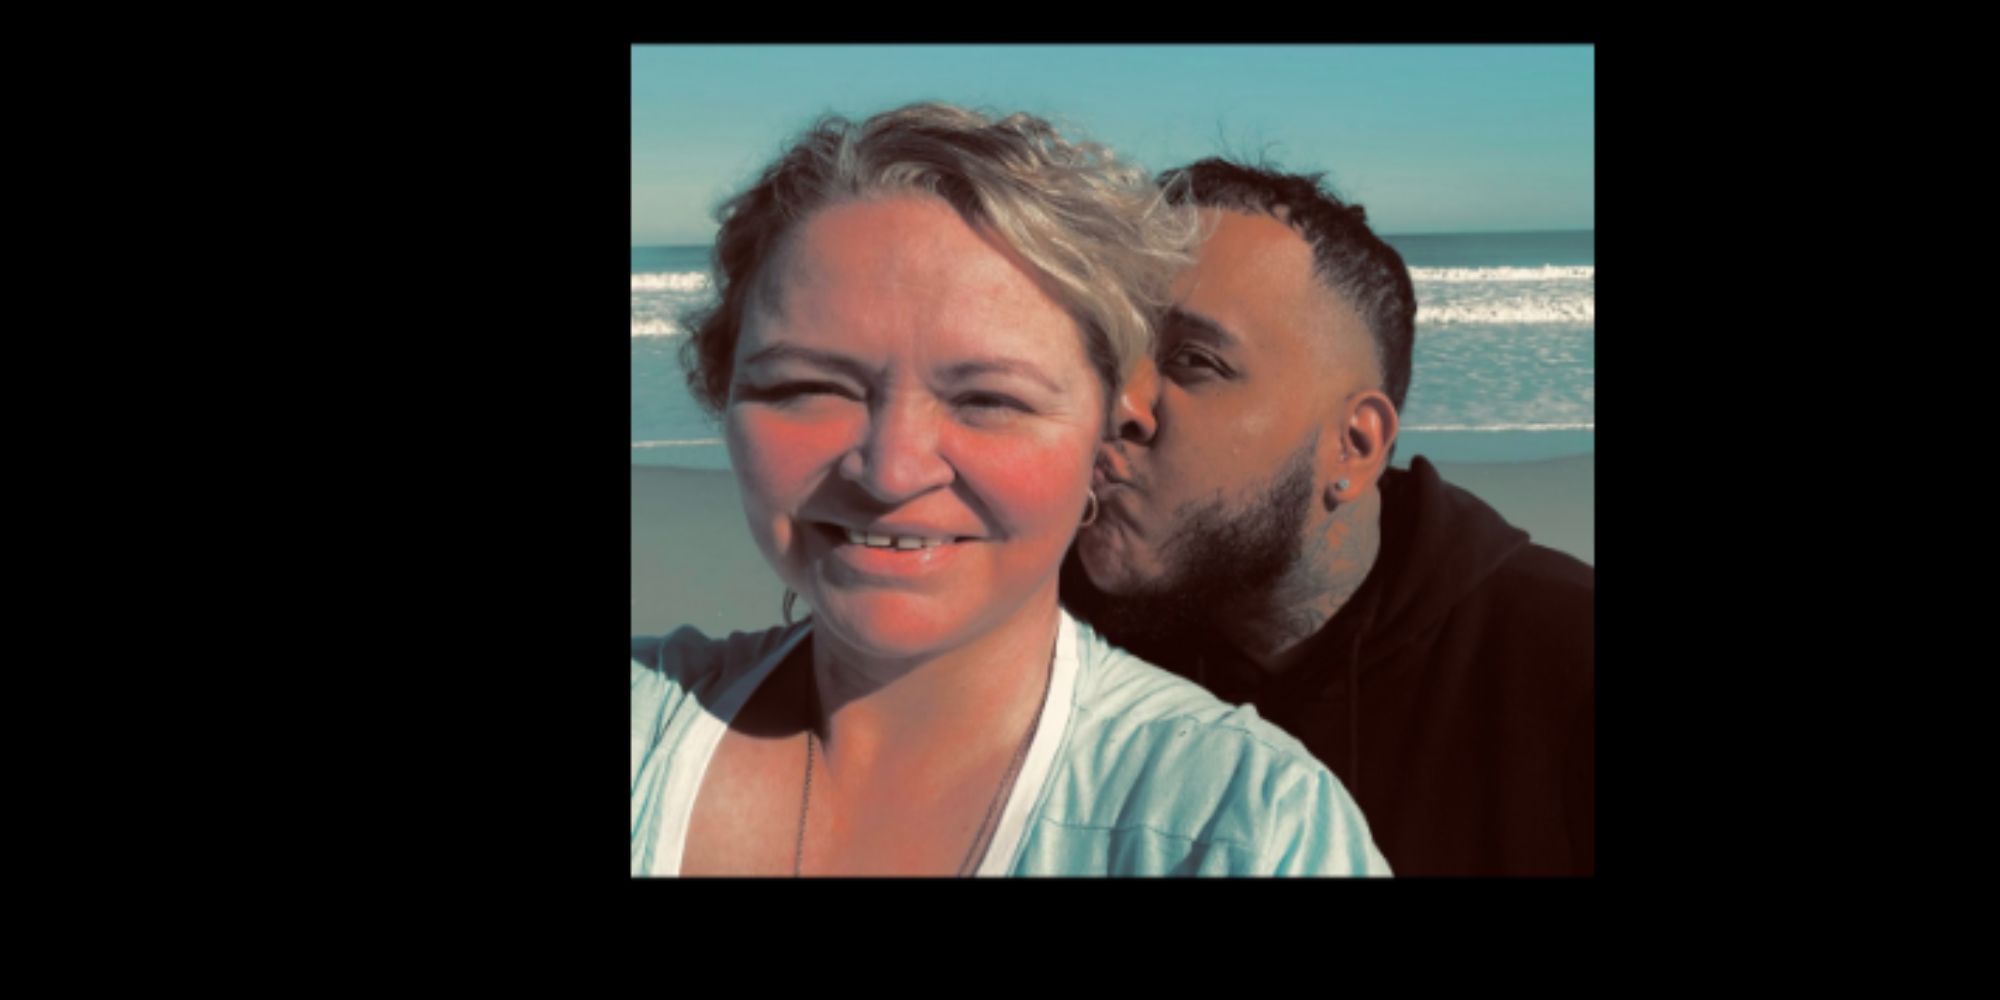 1000-lb Sisters Amanda Halterma at the beach with RJ, he kisses the back of her head, they both look to camera